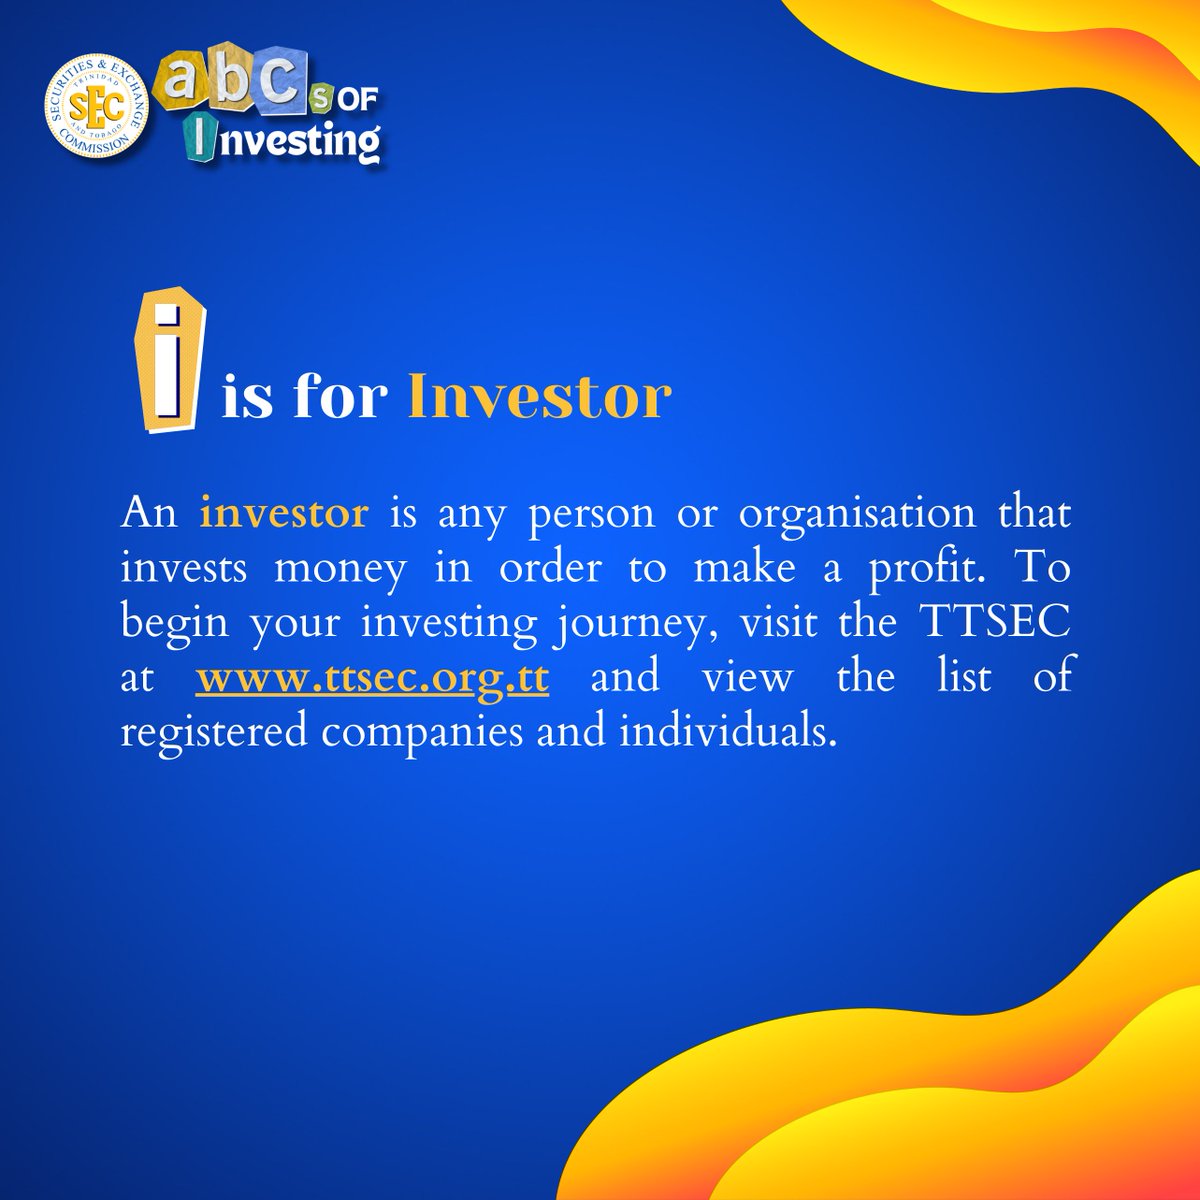 Happy National Investor Education Month! It’s time to learn the ABCs of Investing.

The letter of the day is “I” for Investor.

You Invest. We Protect. Everyone Benefits.

#IEmonth #InvestorEducation #FinancialInclusion #TTSEC